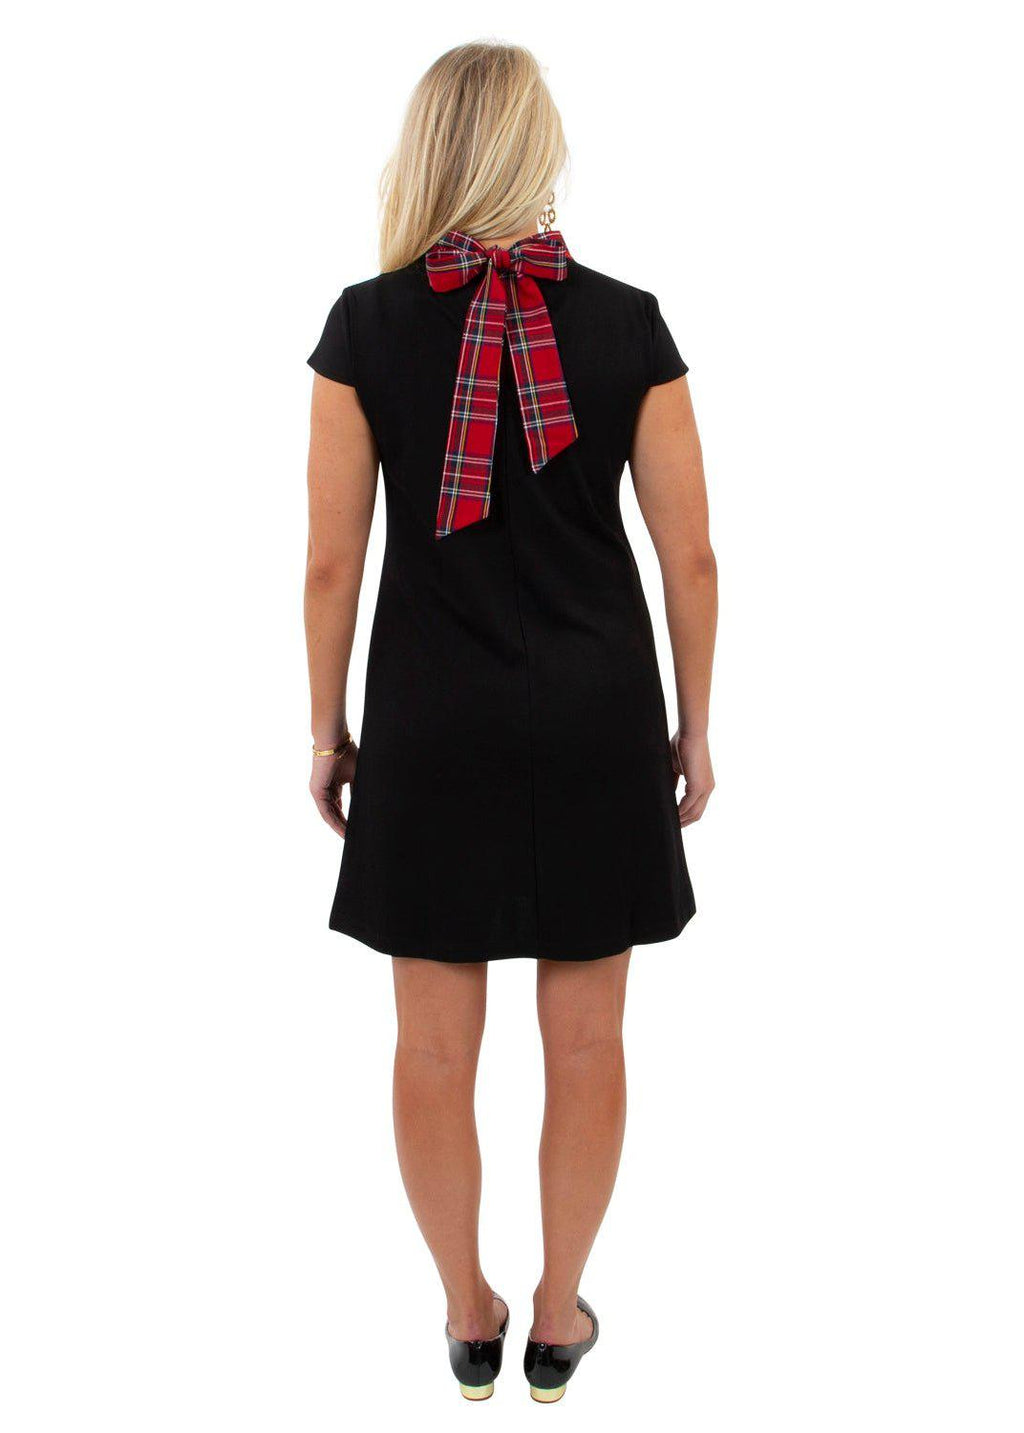 Molly Bow Back Dress - Black/Red Plaid Bow-2